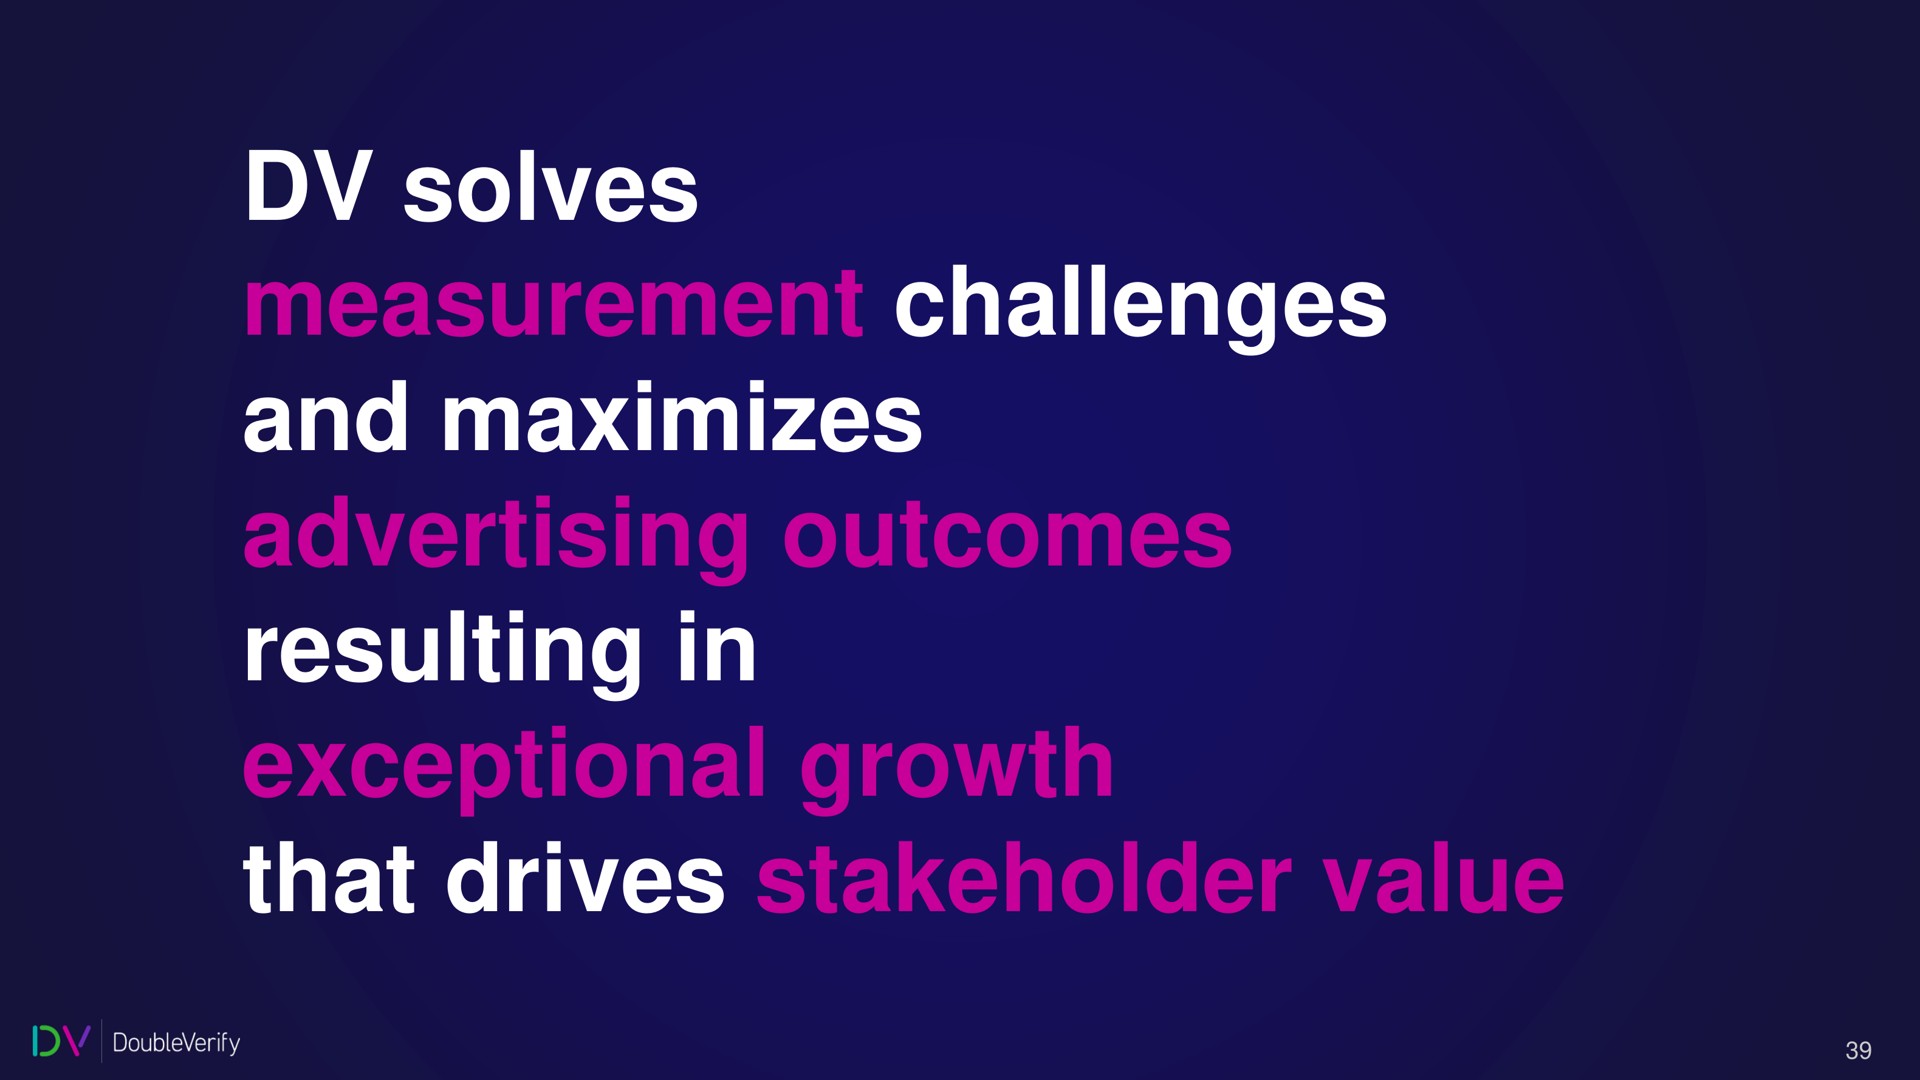 solves measurement challenges and maximizes advertising outcomes resulting in exceptional growth that drives stakeholder value | DoubleVerify